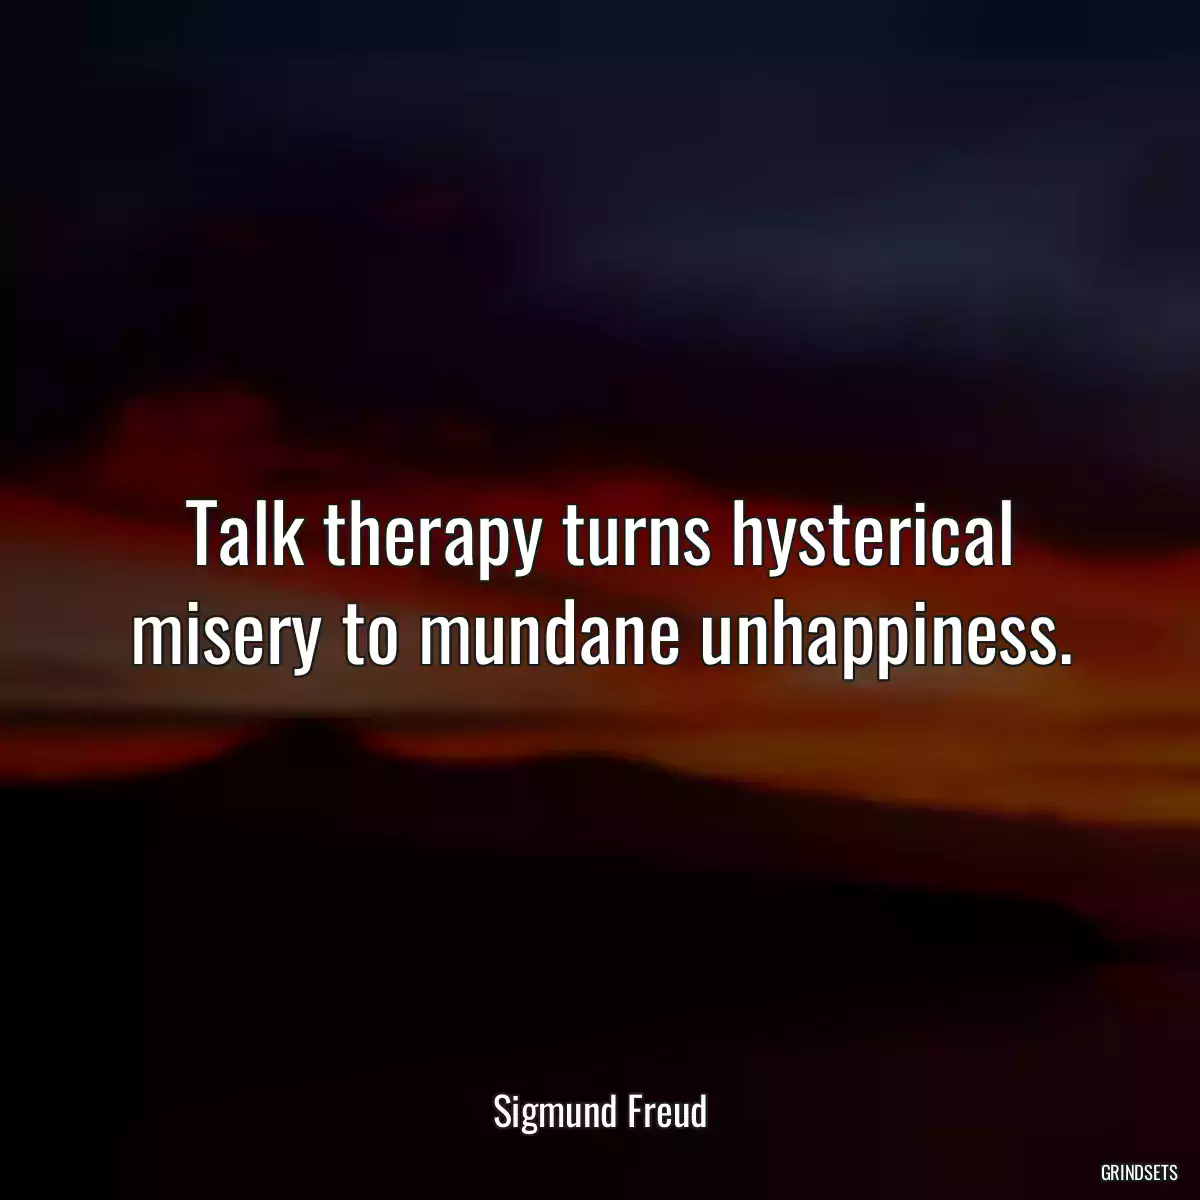 Talk therapy turns hysterical misery to mundane unhappiness.